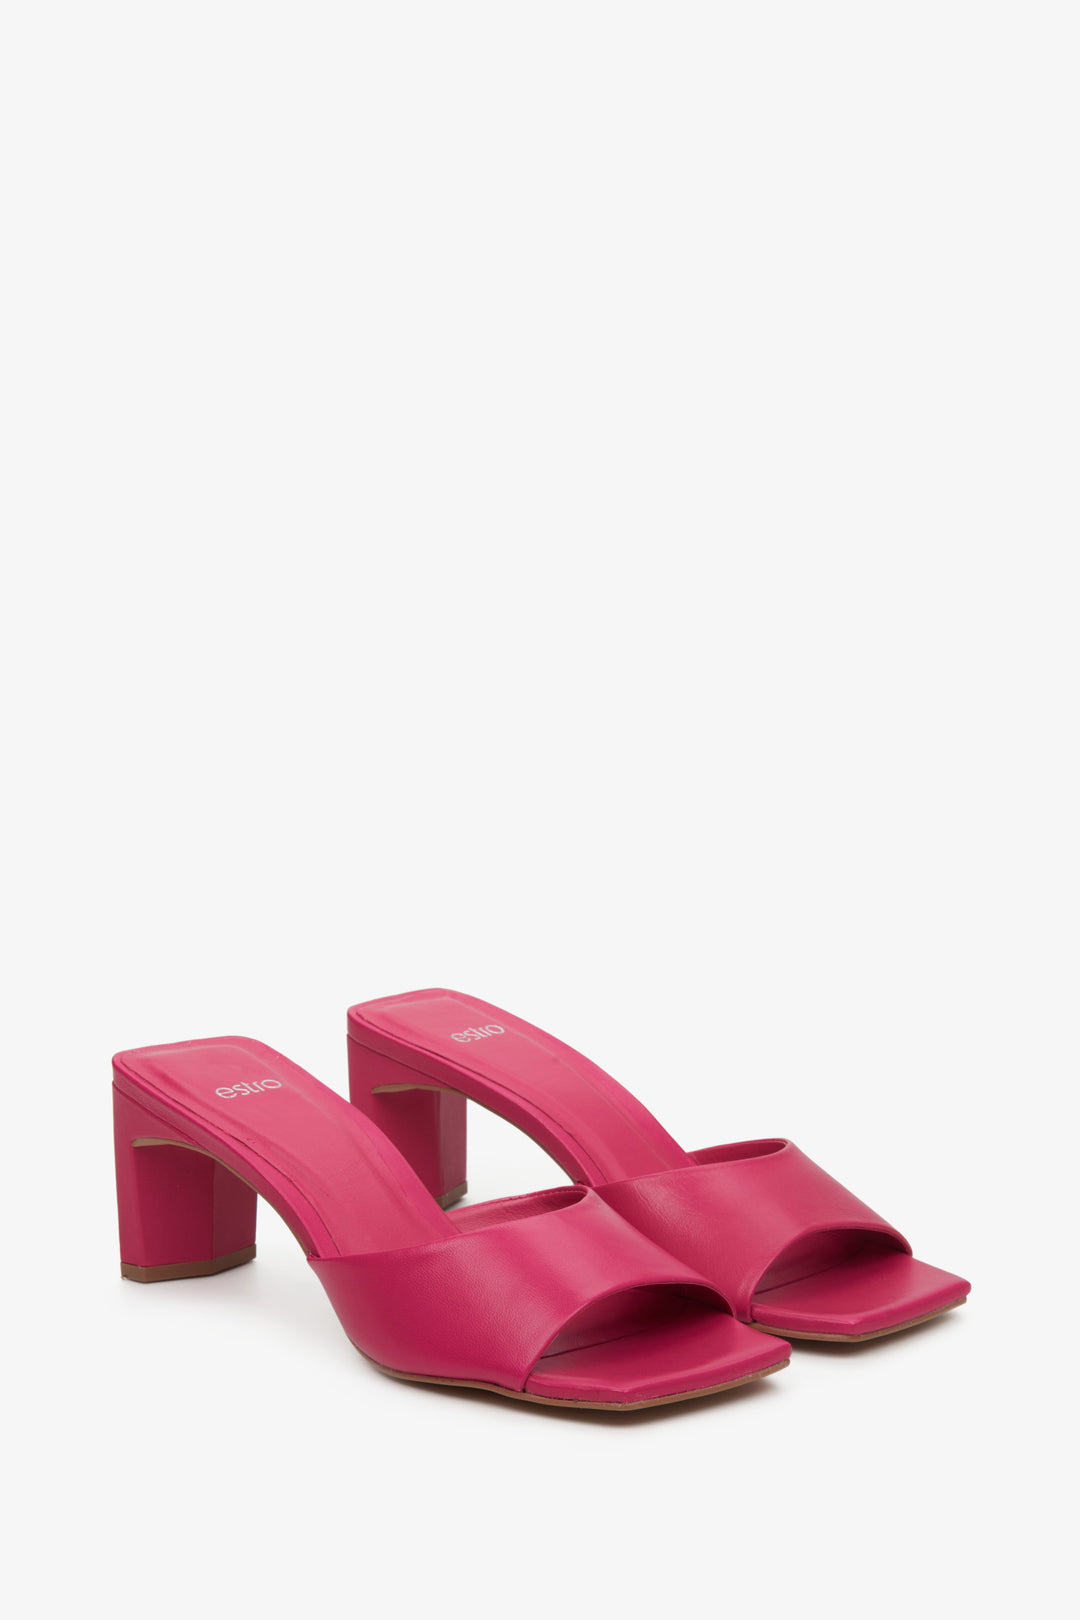 Women's pink leather mules with a sturdy block heel by Estro - close-up on the shoe's toe.